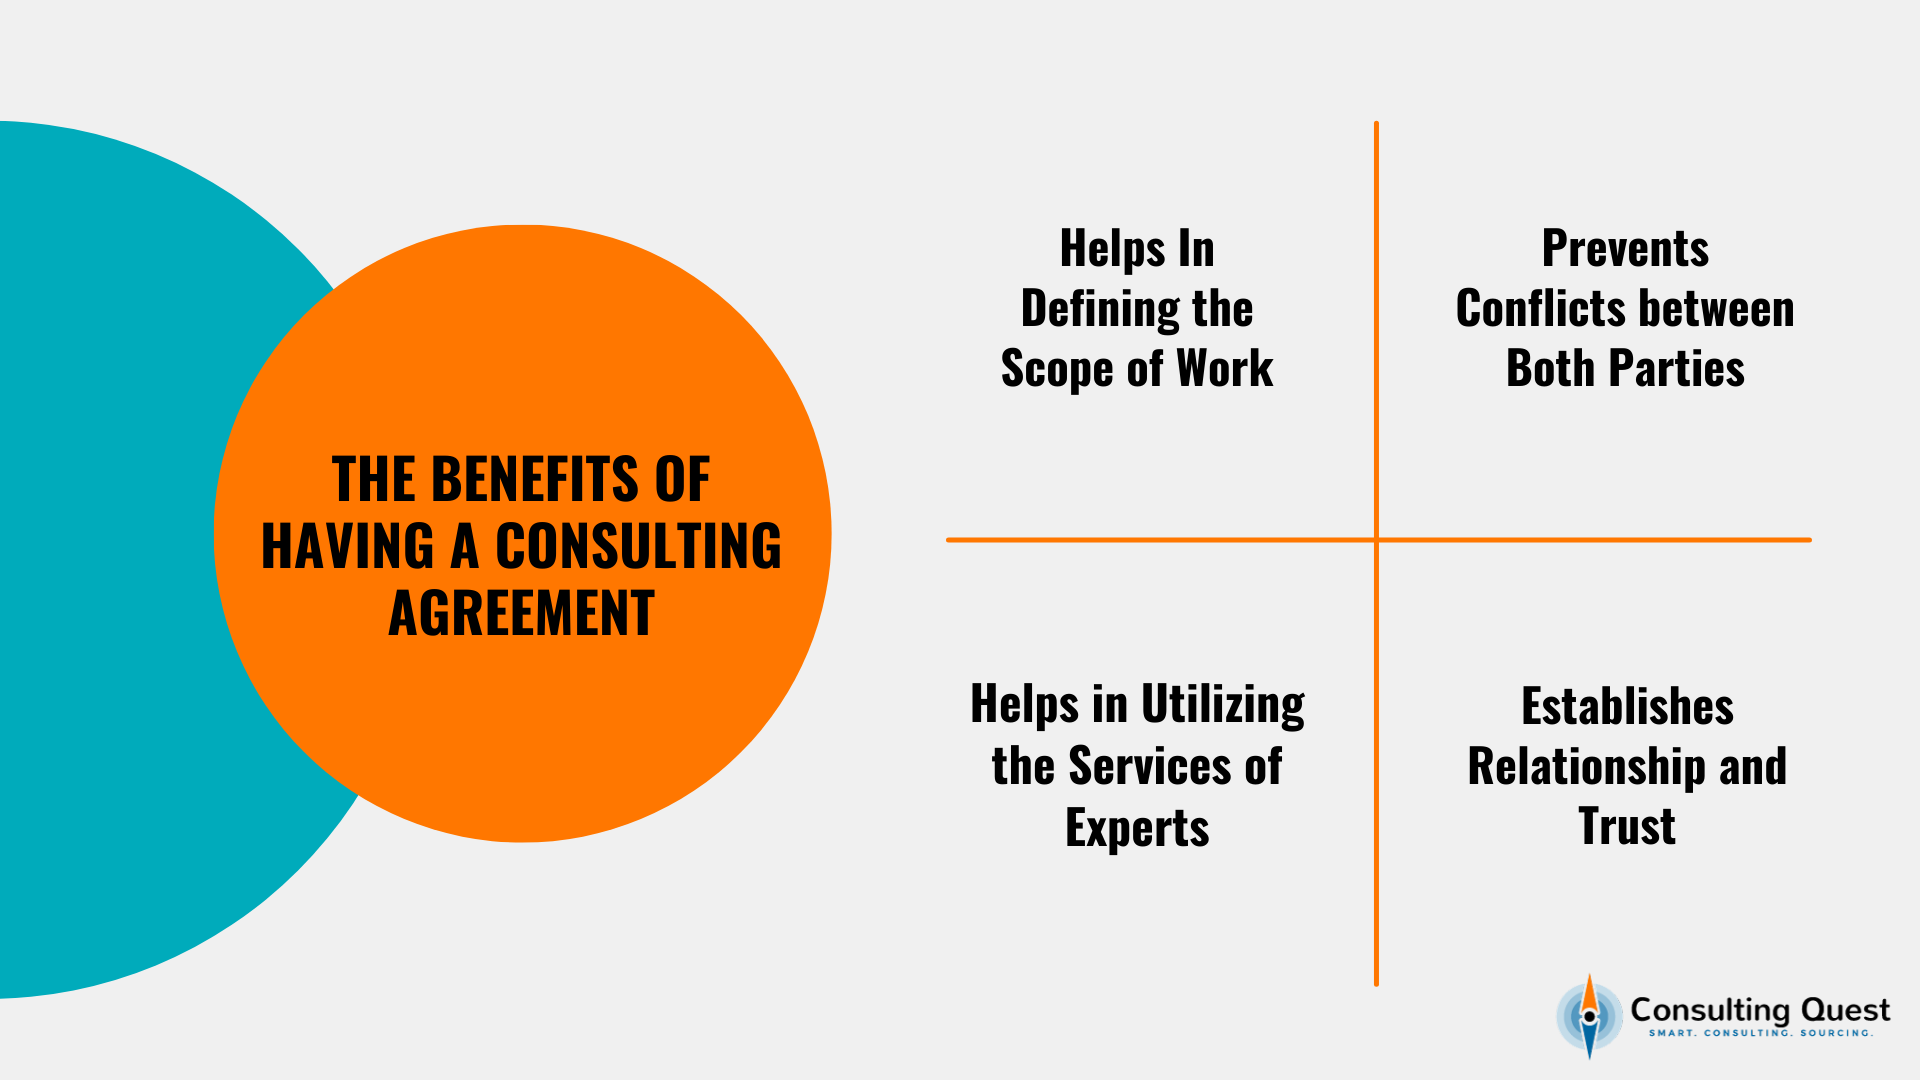 Benefits of having a consulting agreement